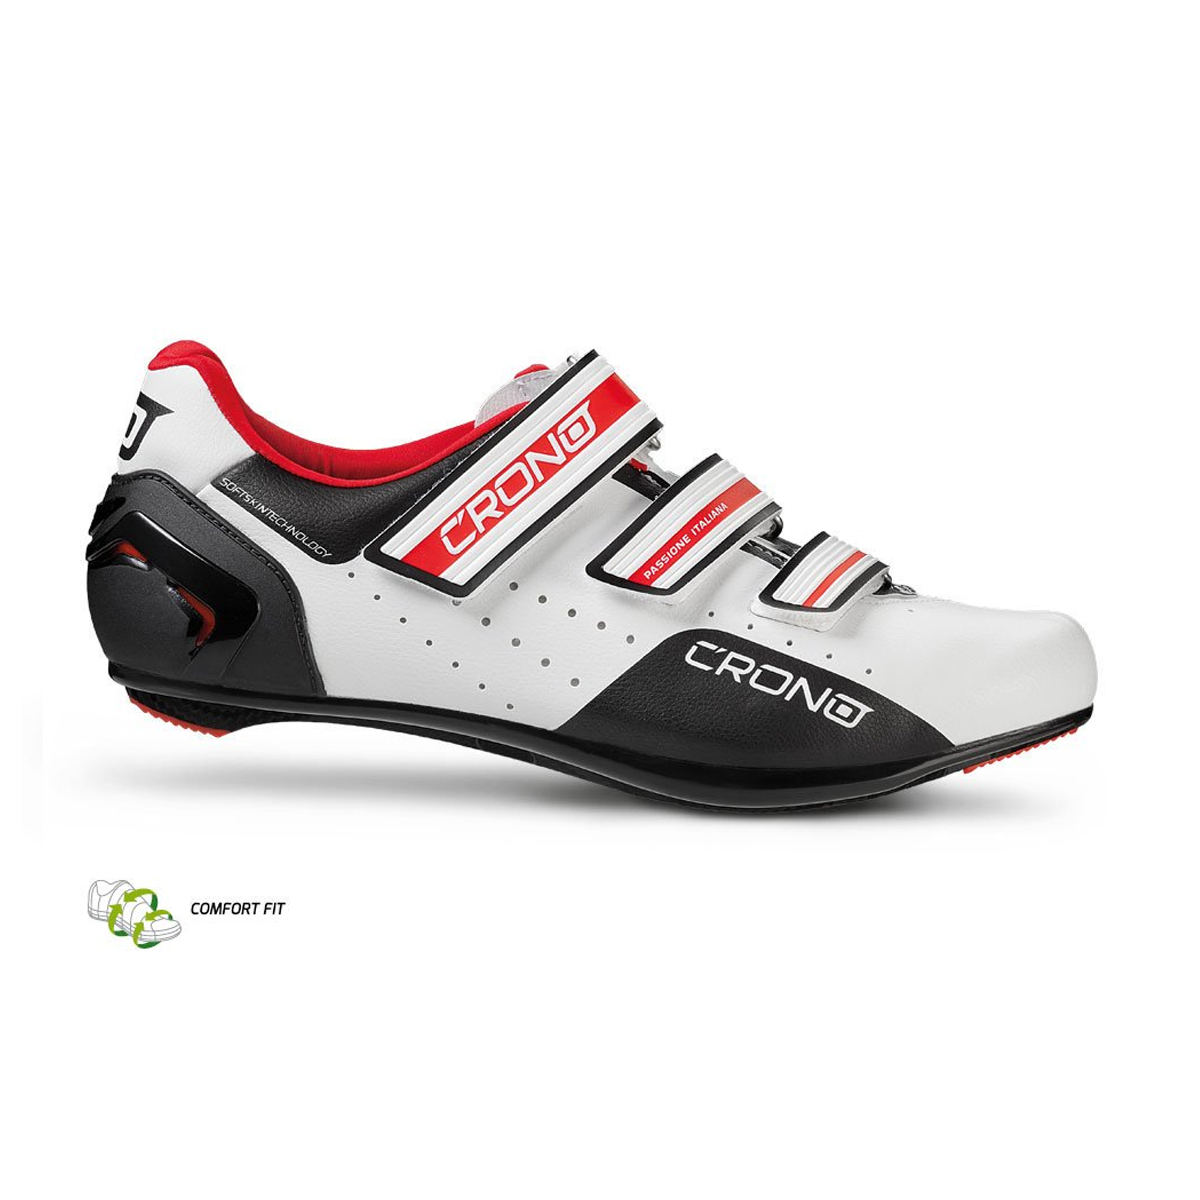 ROAD CYCLING SHOES, 3 VELCRO CLOSURE 